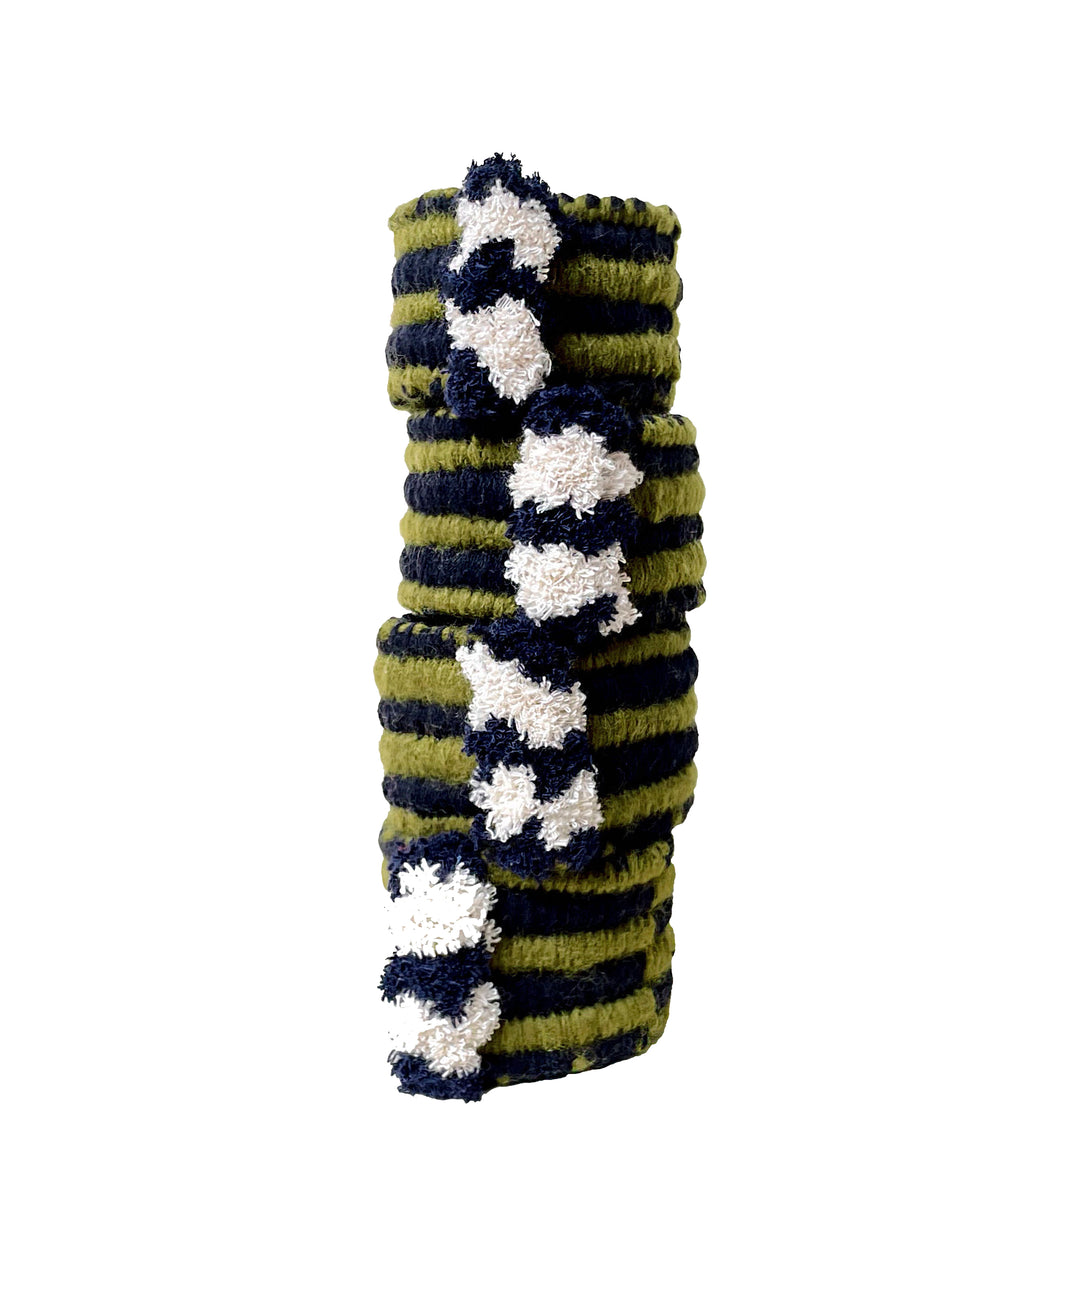 Moss Handwoven Napkin Rings - Striped Set of 4